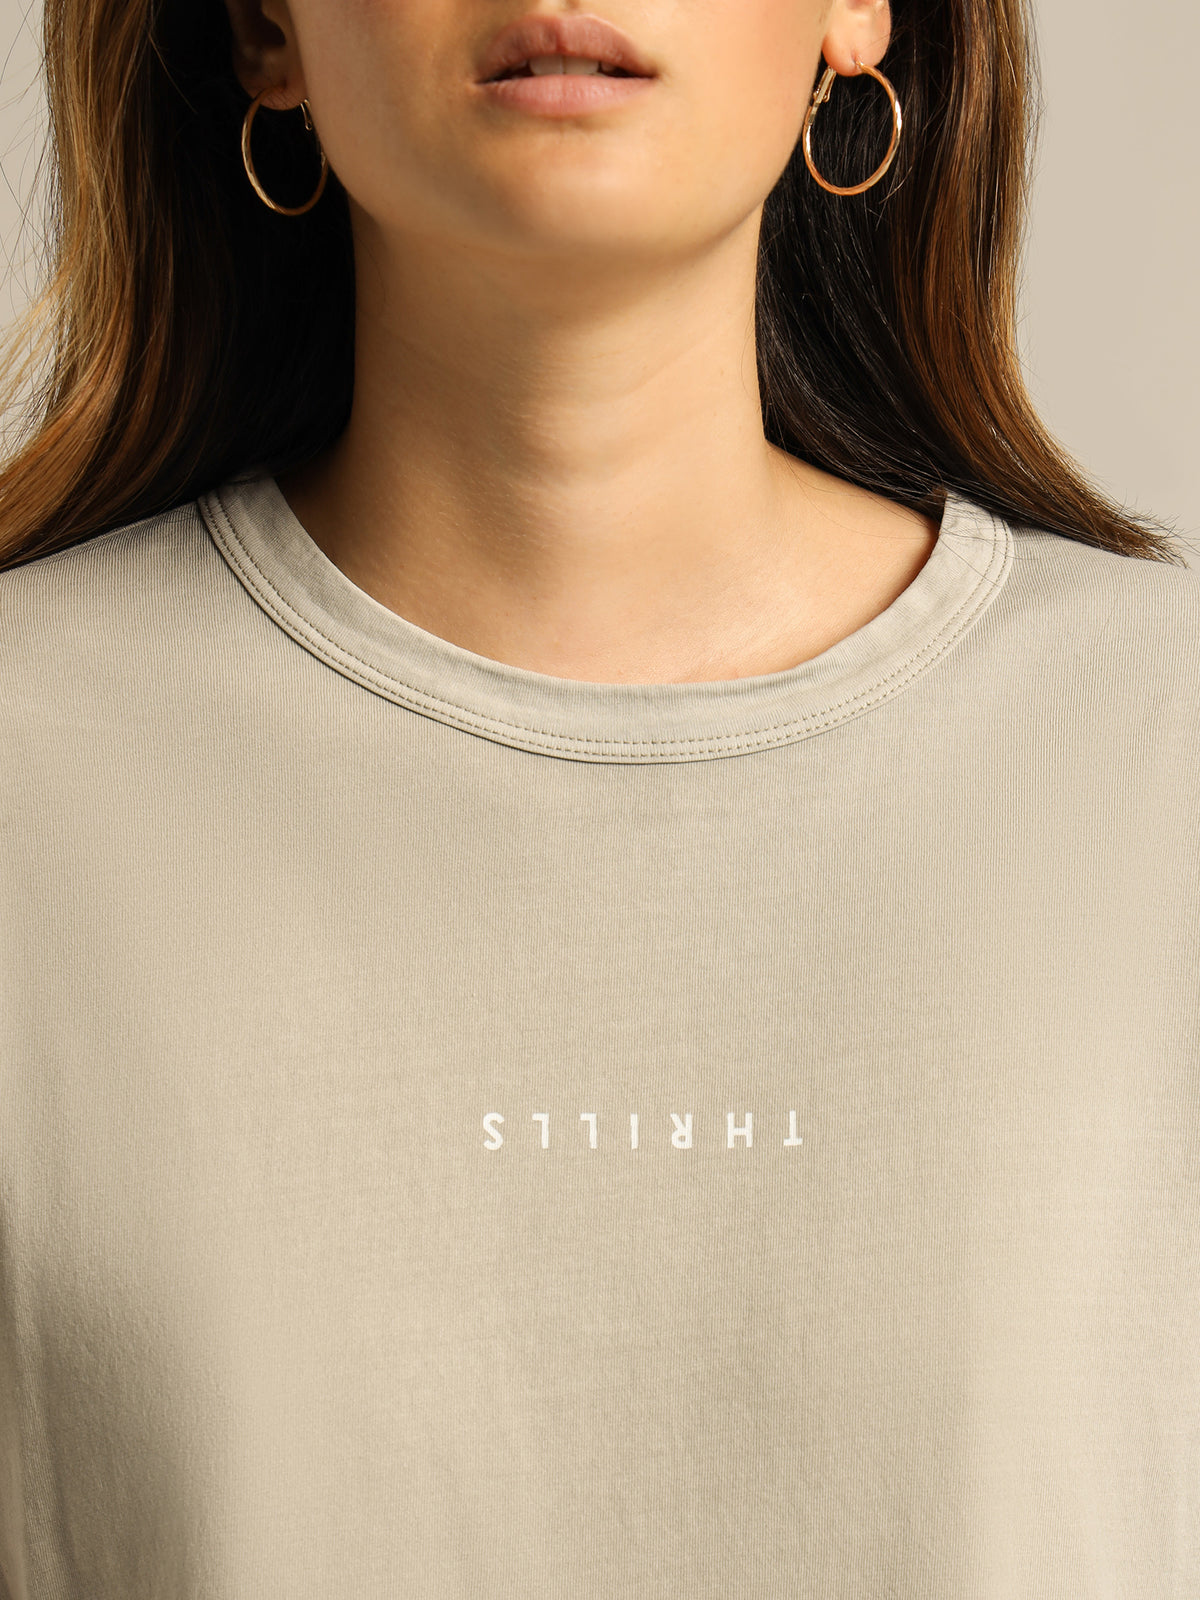 Minimal Thrills Relaxed T-Shirt in Gravel